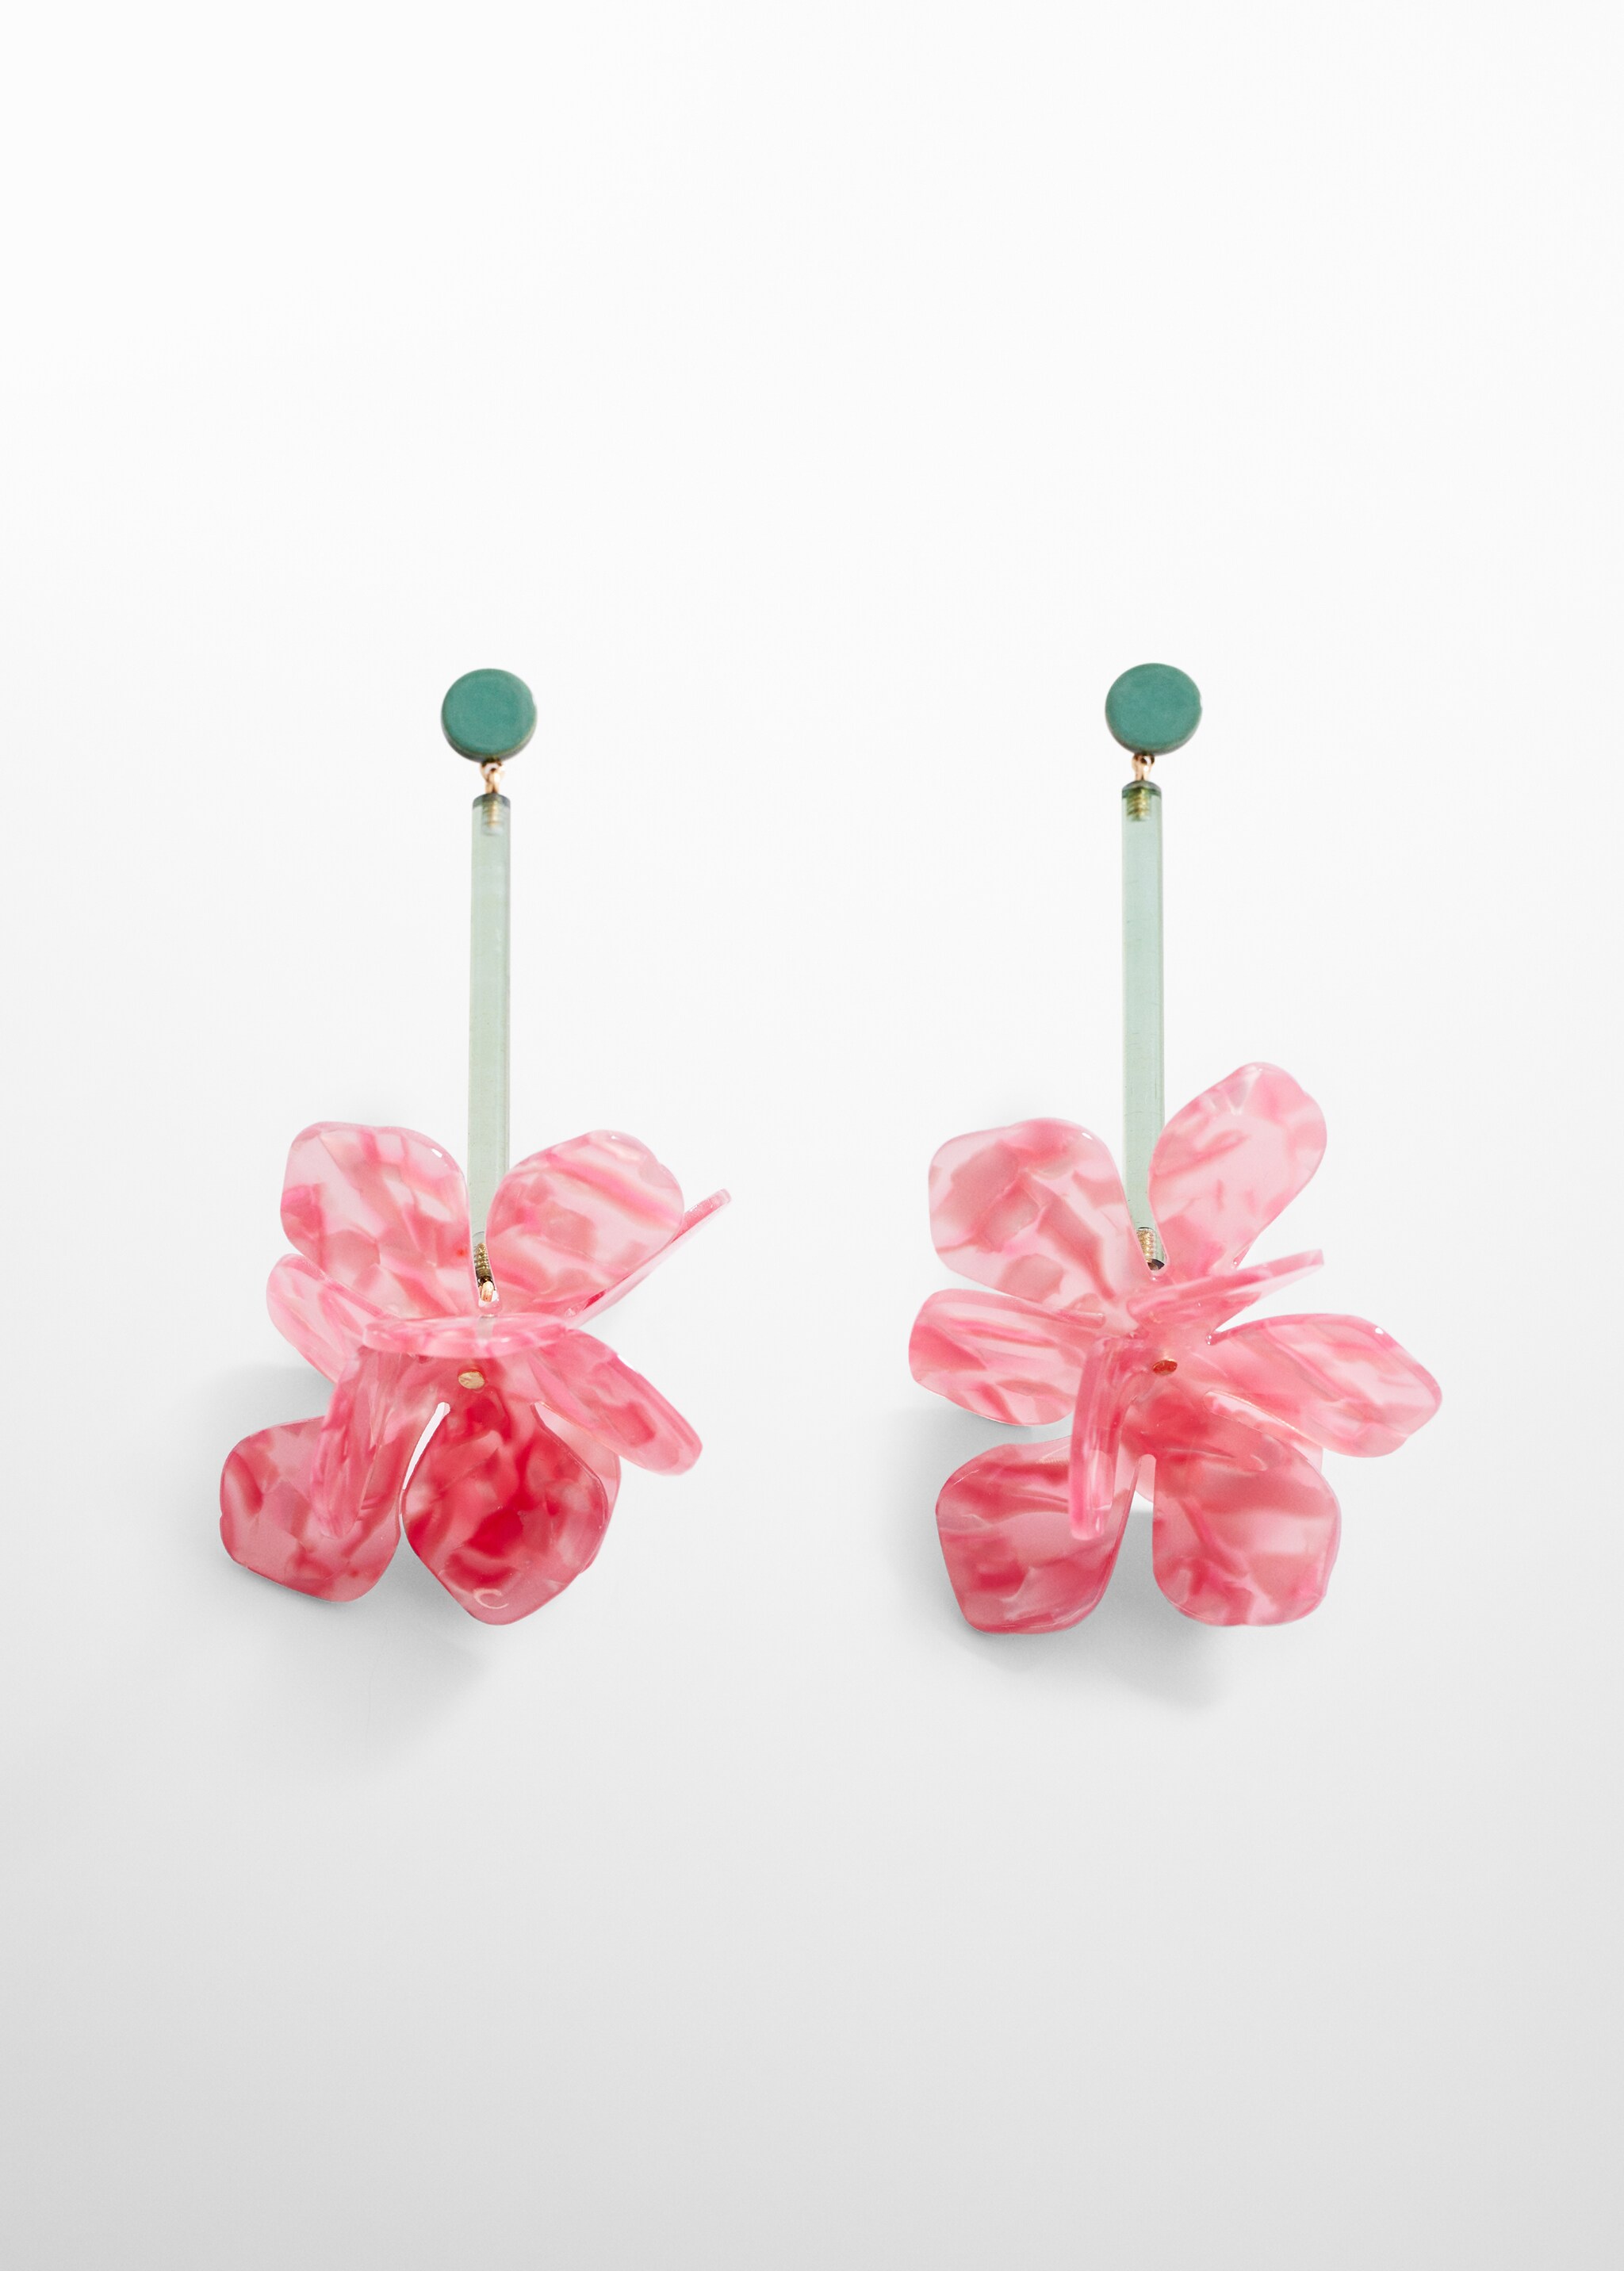 Flower pendant earrings - Article without model